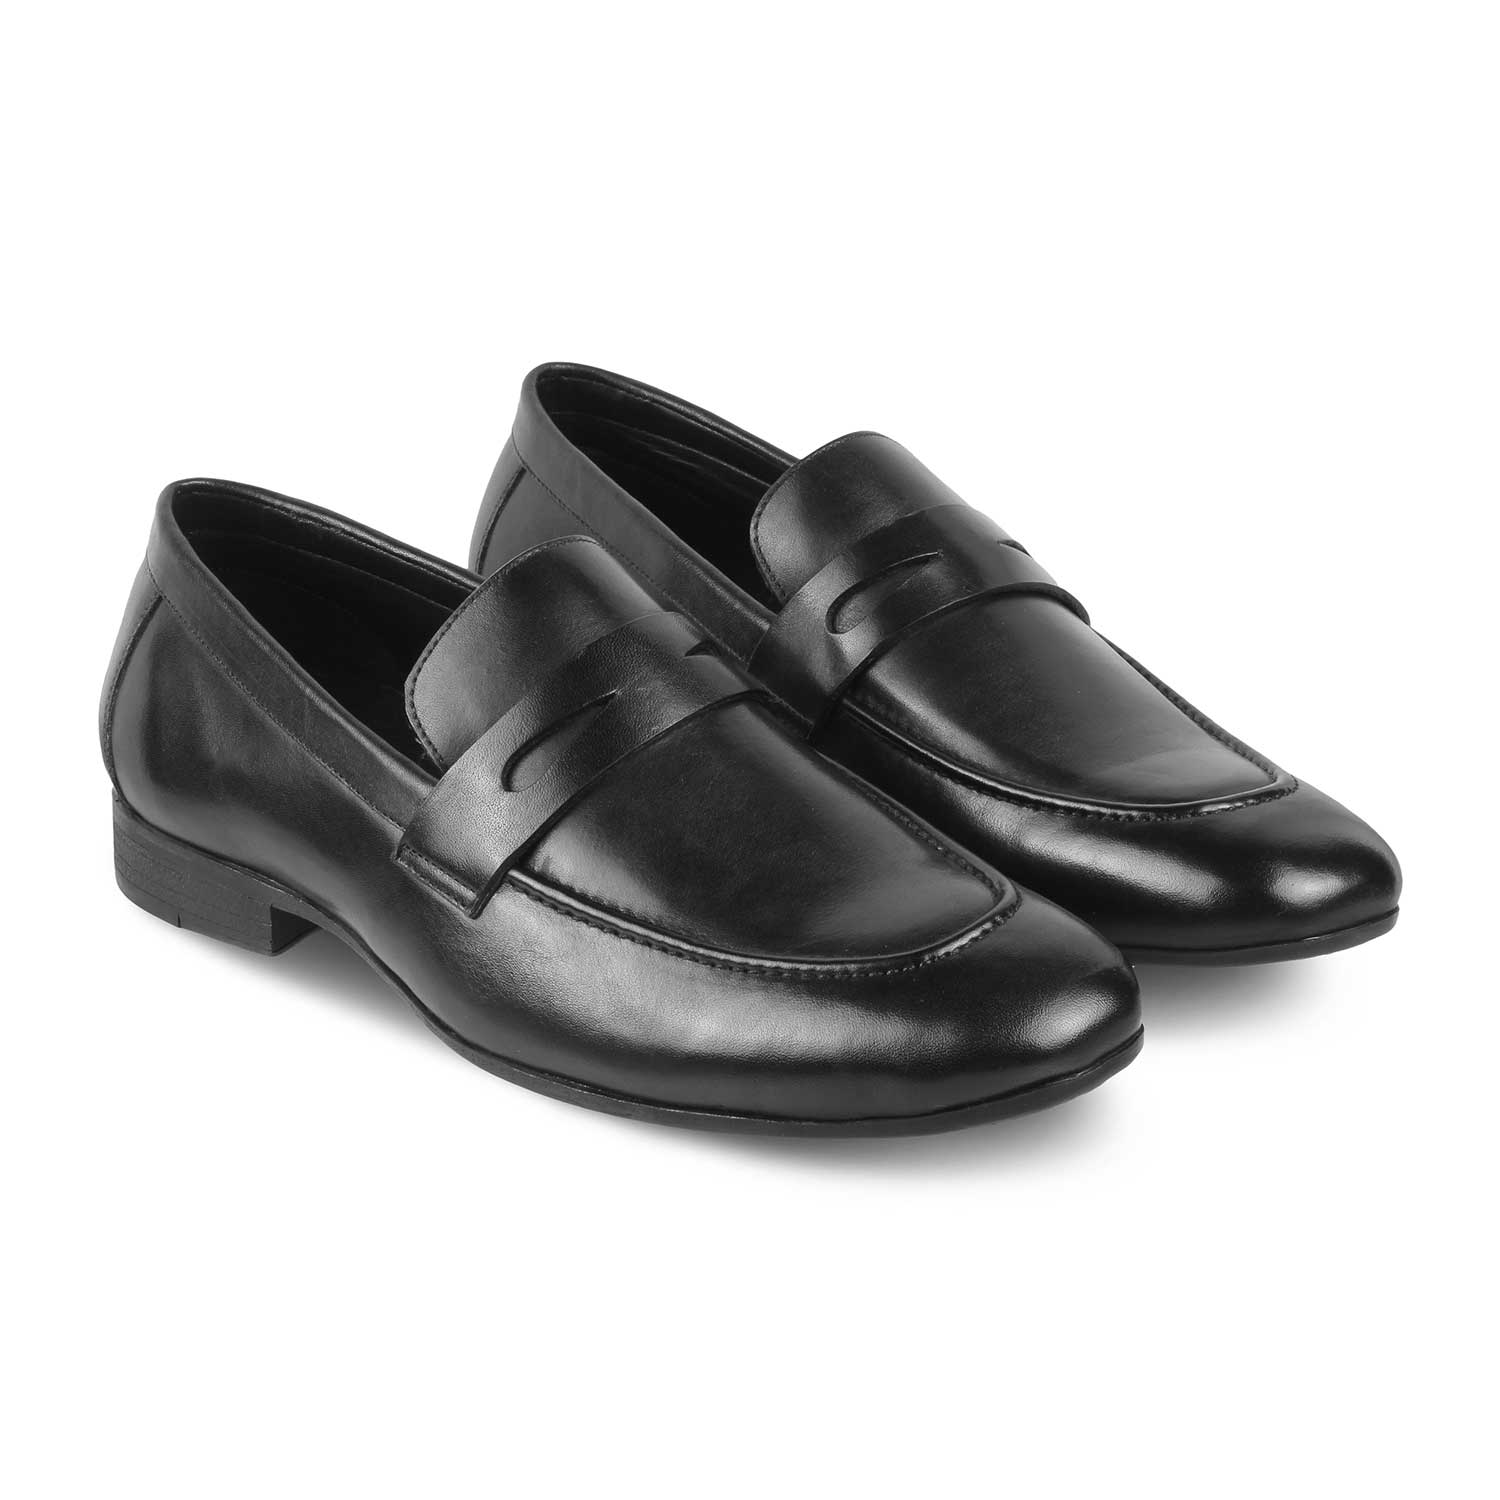 Apenny Black Men's Leather Penny Loafers Online at Tresmode.com